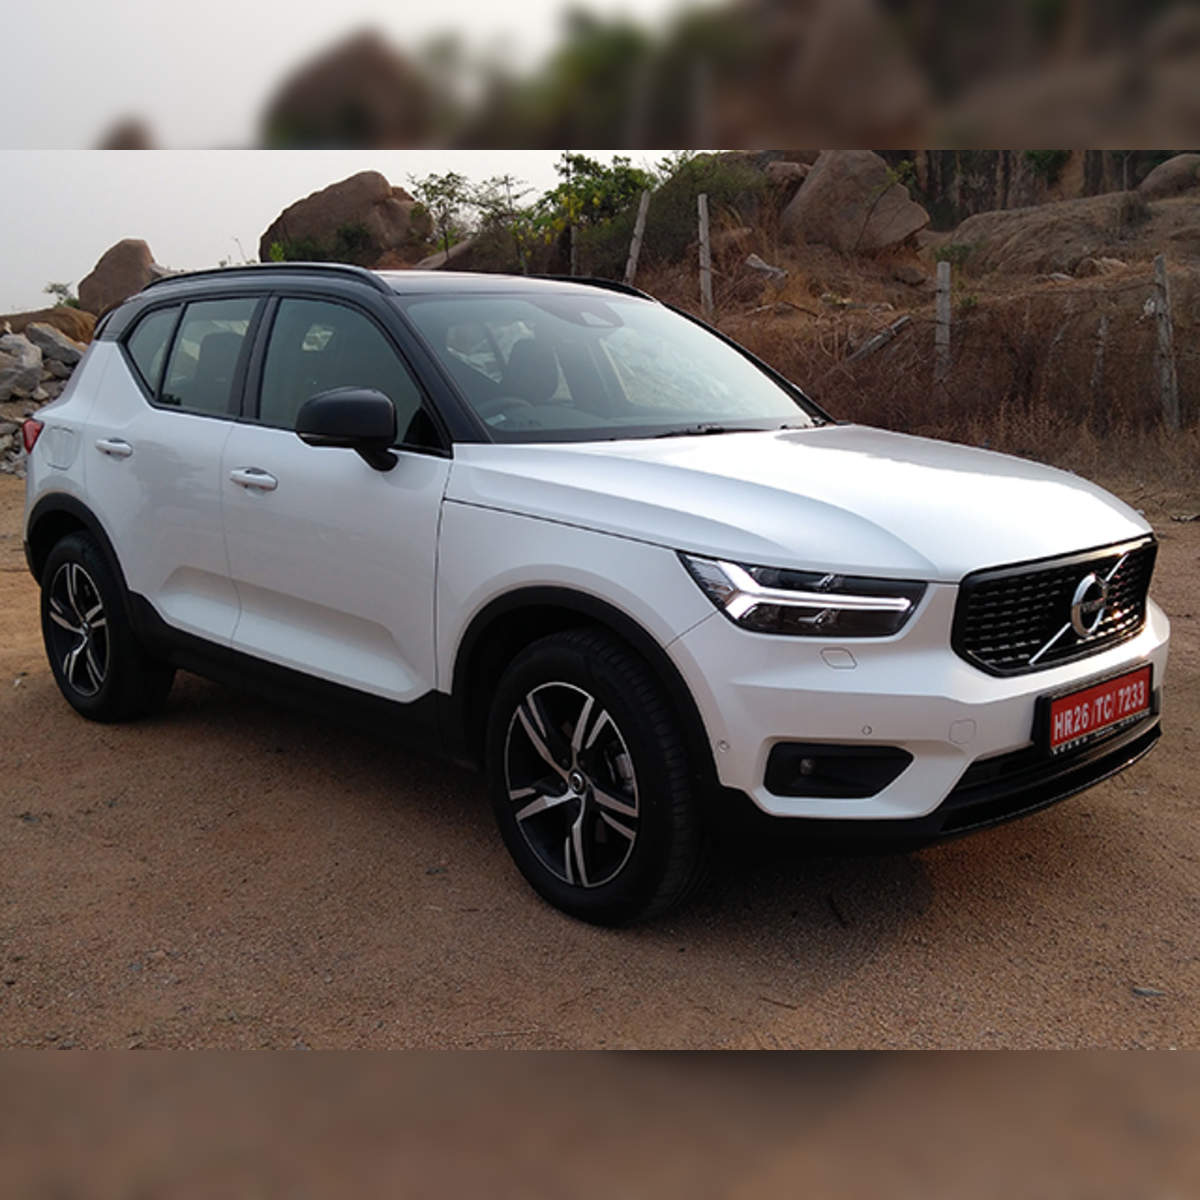 XC40 review: Volvo's smallest SUV is big on design - The Economic Times